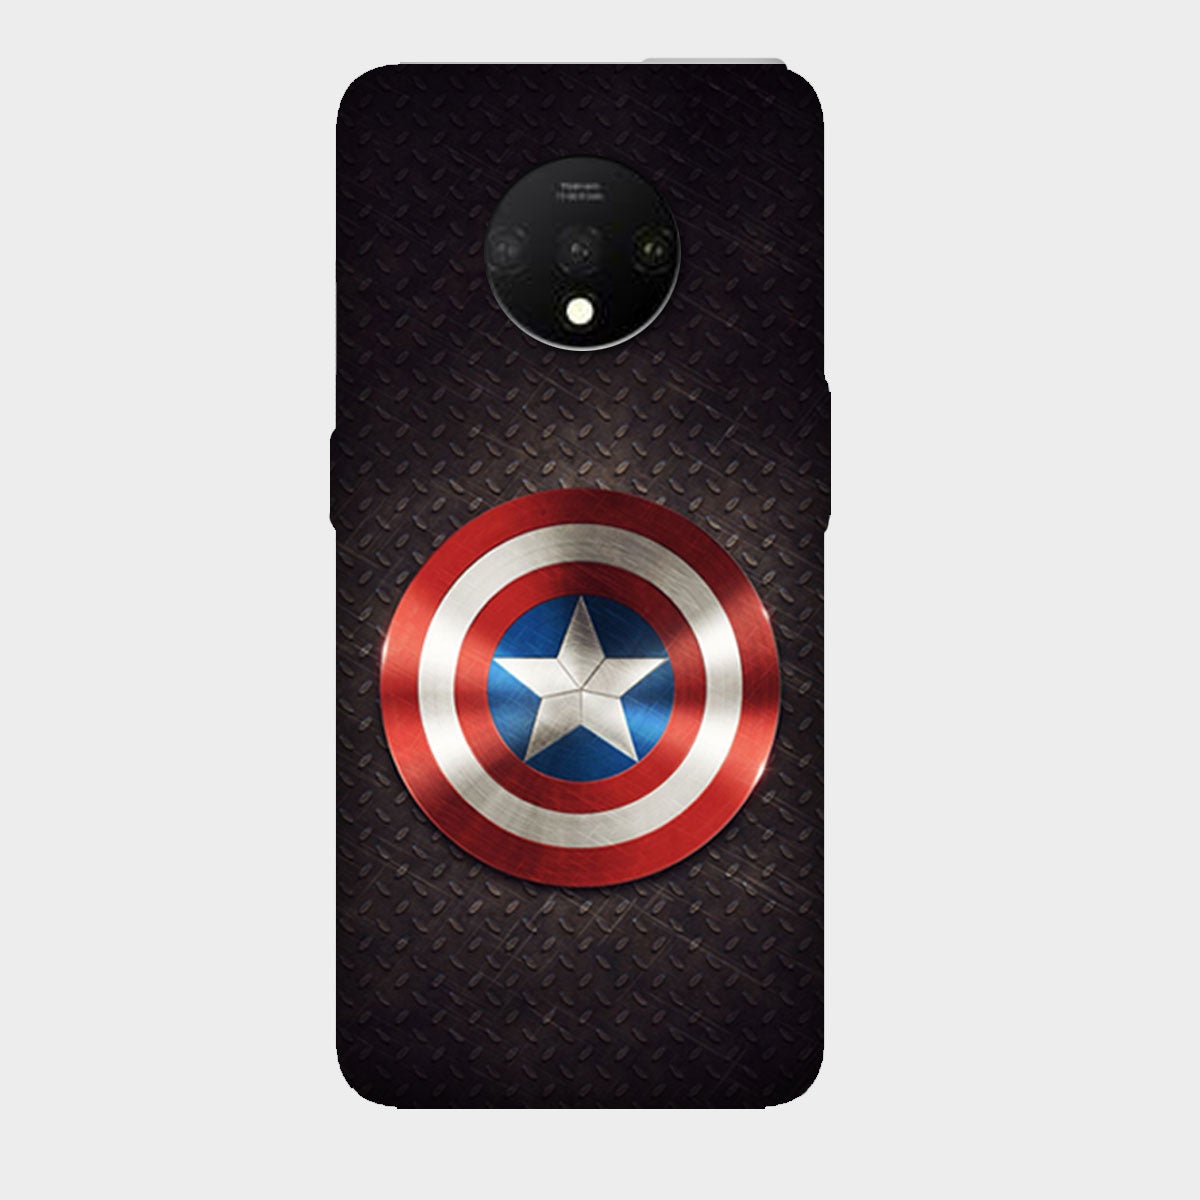 Captain America Shield - Mobile Phone Cover - Hard Case - OnePlus